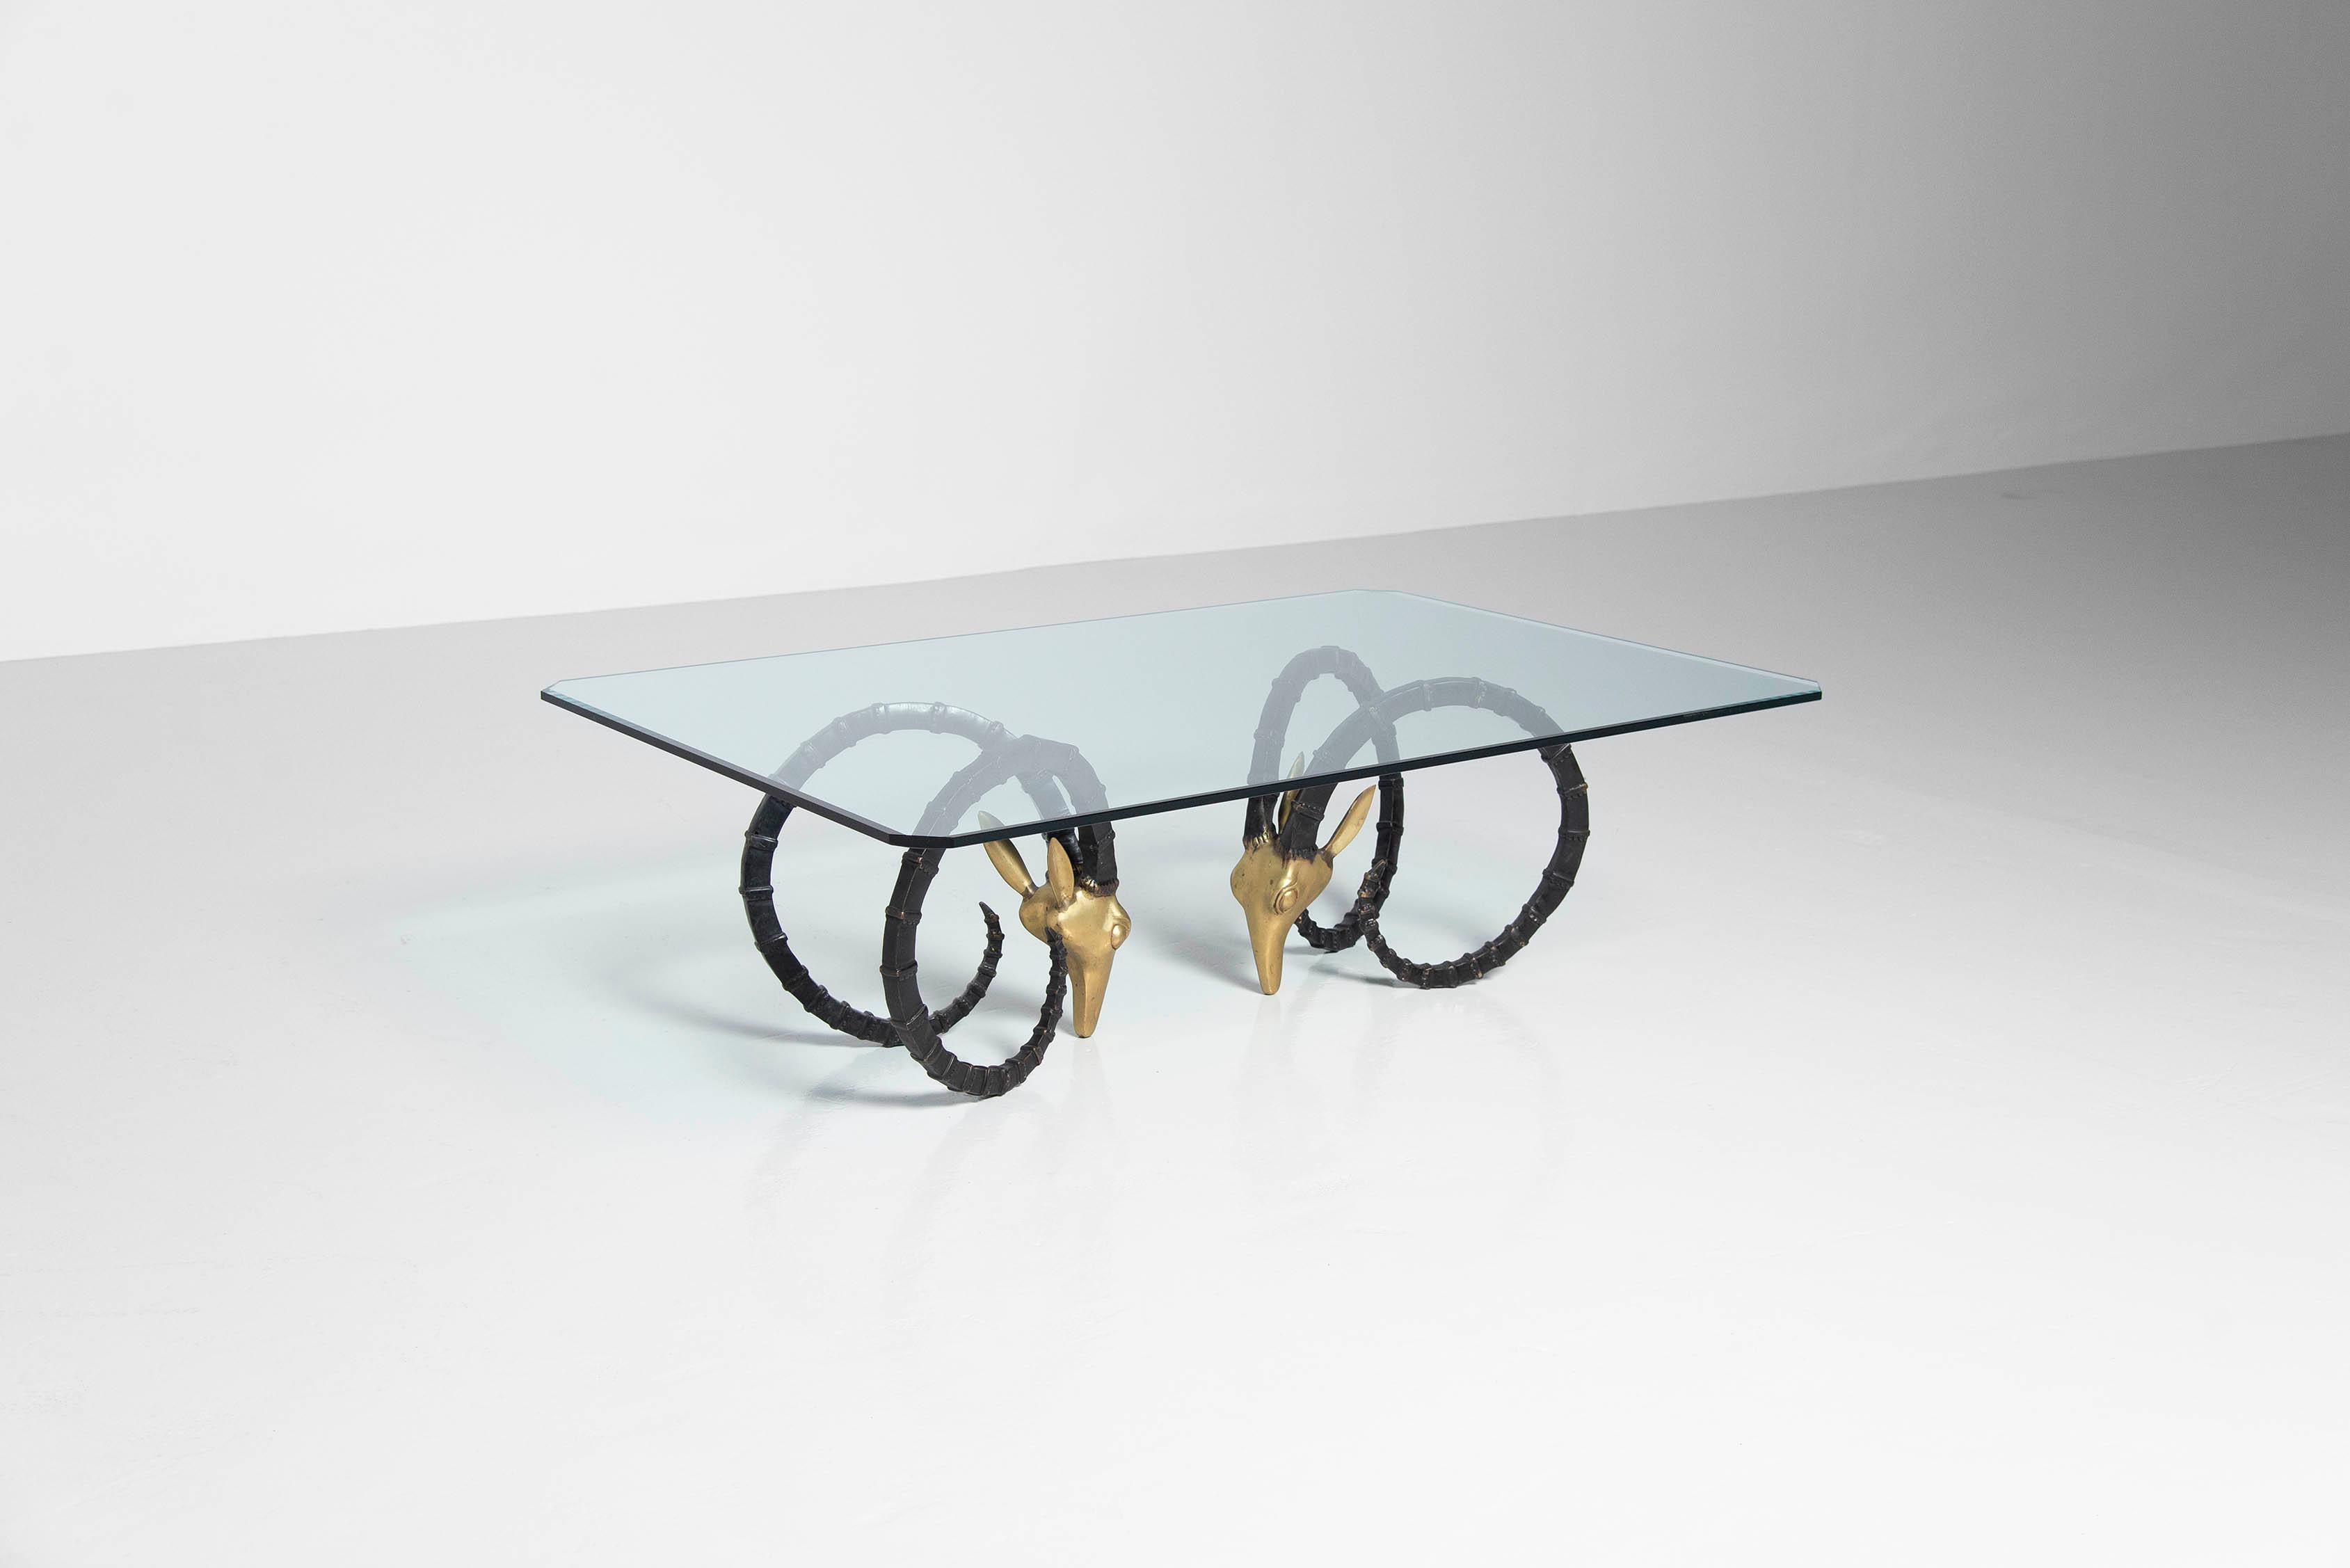 Dramatic glass top table with a pair of bronze ram head bases attributed to Leon Francois Chervet, France 1970. The glass has beveled edges and cut corners. The bronze base was made in a polished brass finish which is partly black patinated, massive